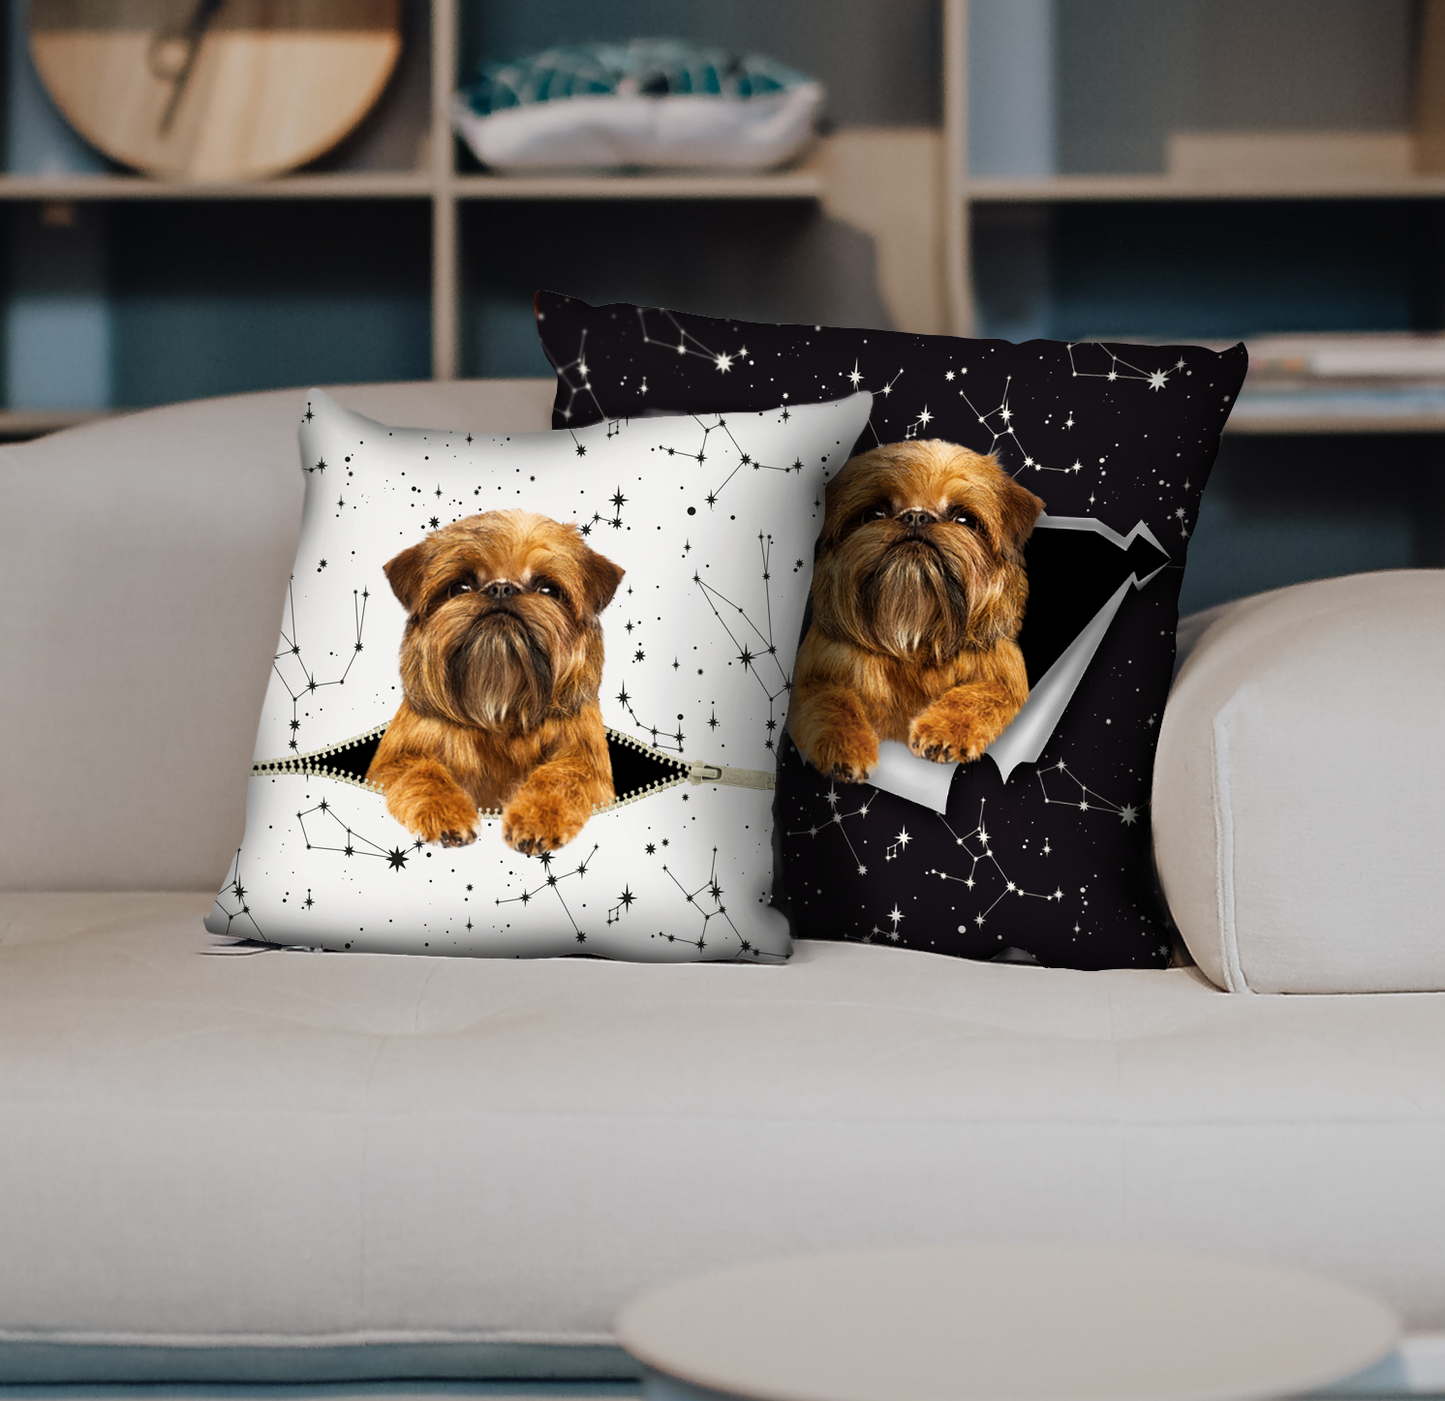 They Steal Your Couch - Griffon Bruxellois Pillow Cases V1 (Set of 2)